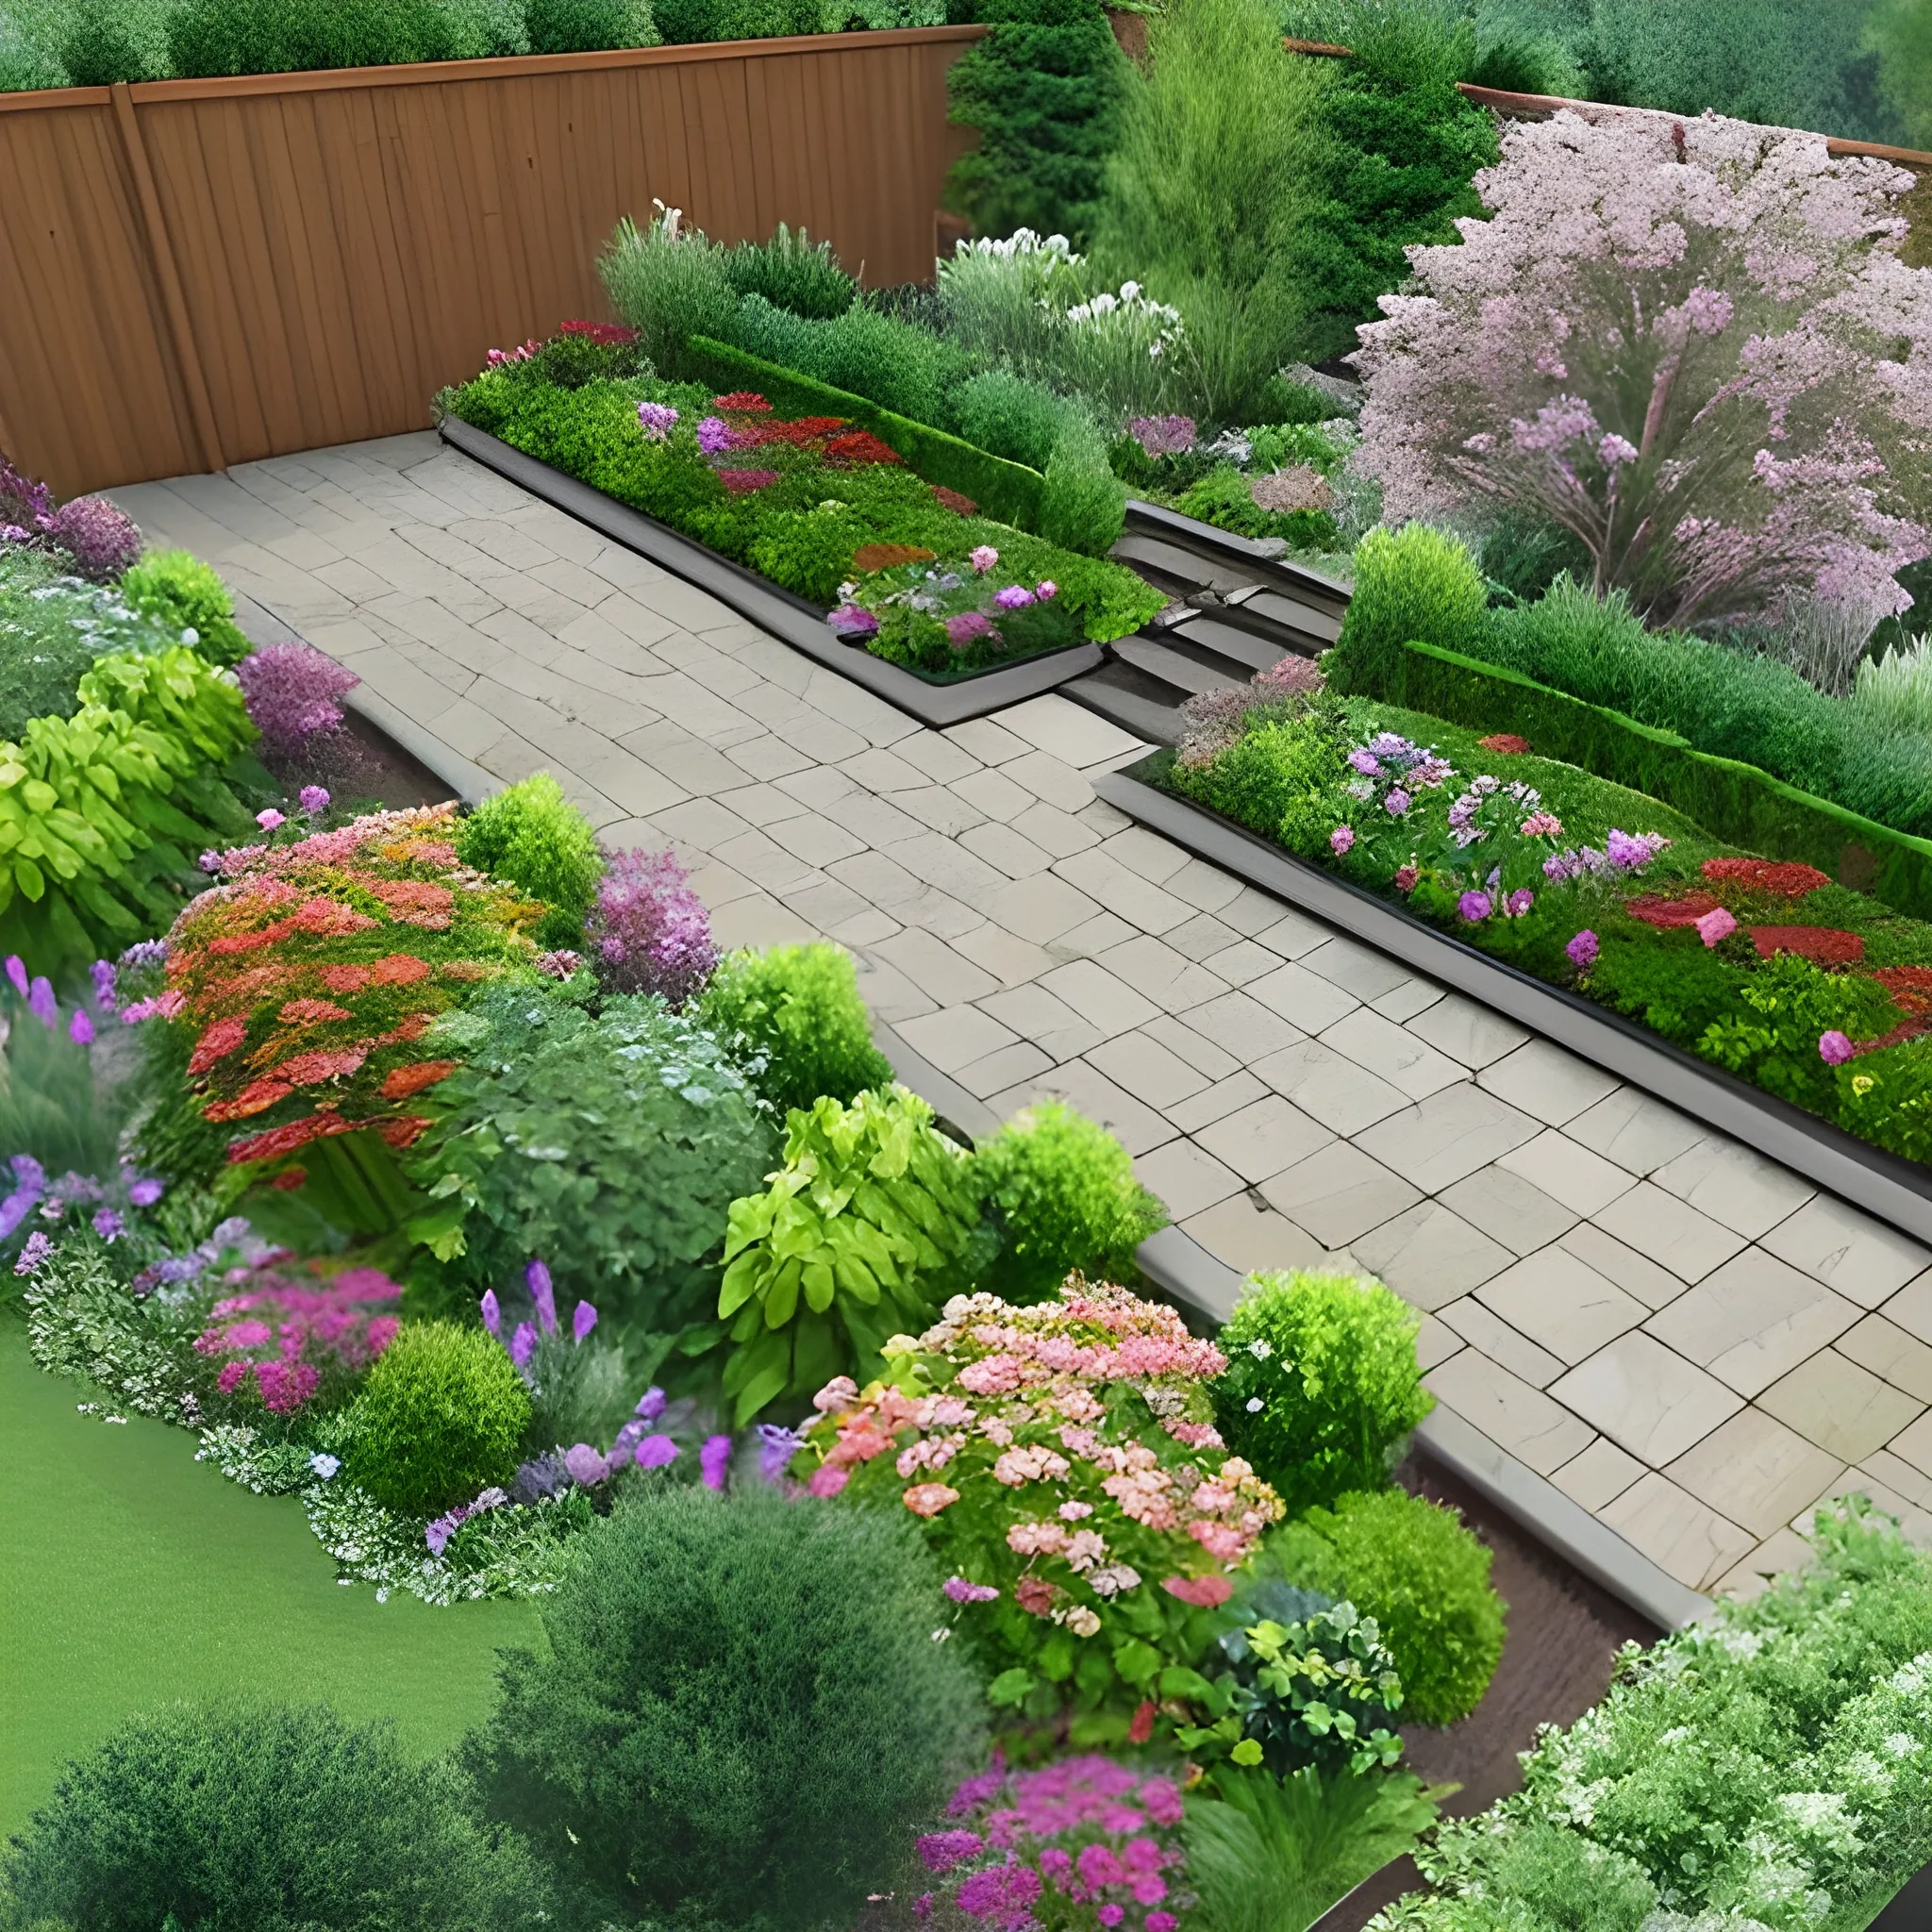 garden layout design, aerial view, railway sleeper border, planters, flowers, trees, decking, gravel paths, Water Color